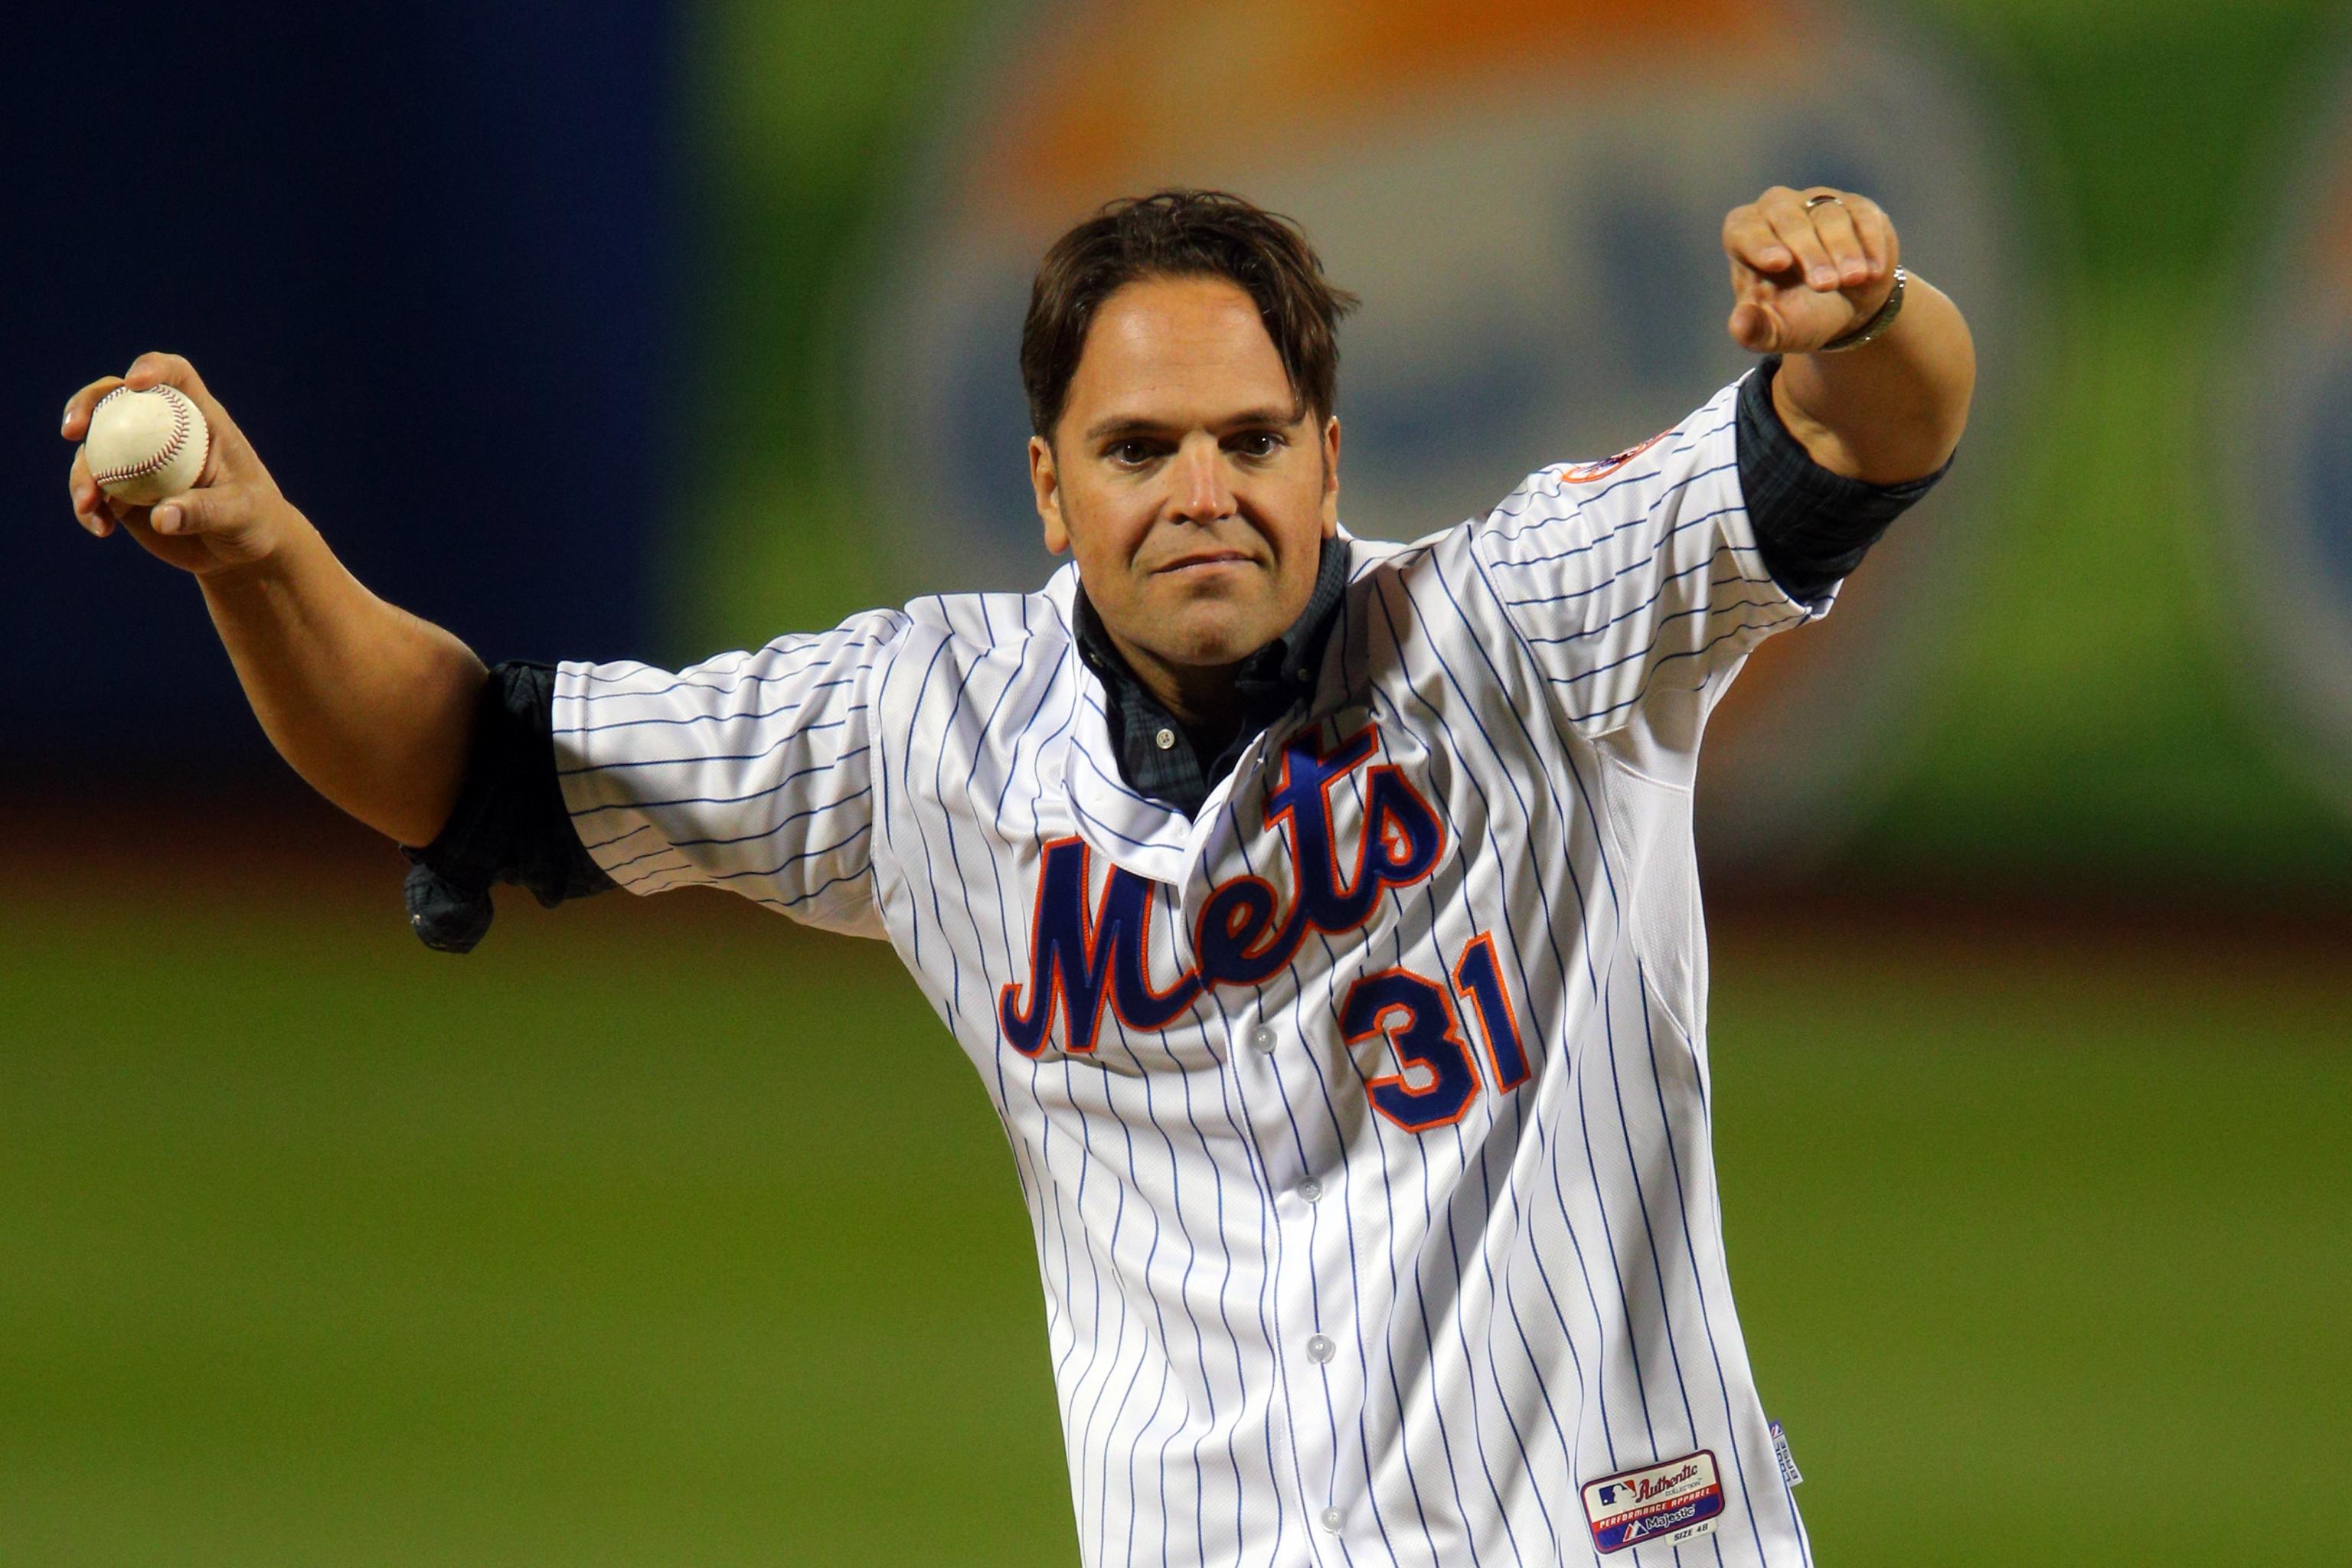 mike piazza stats